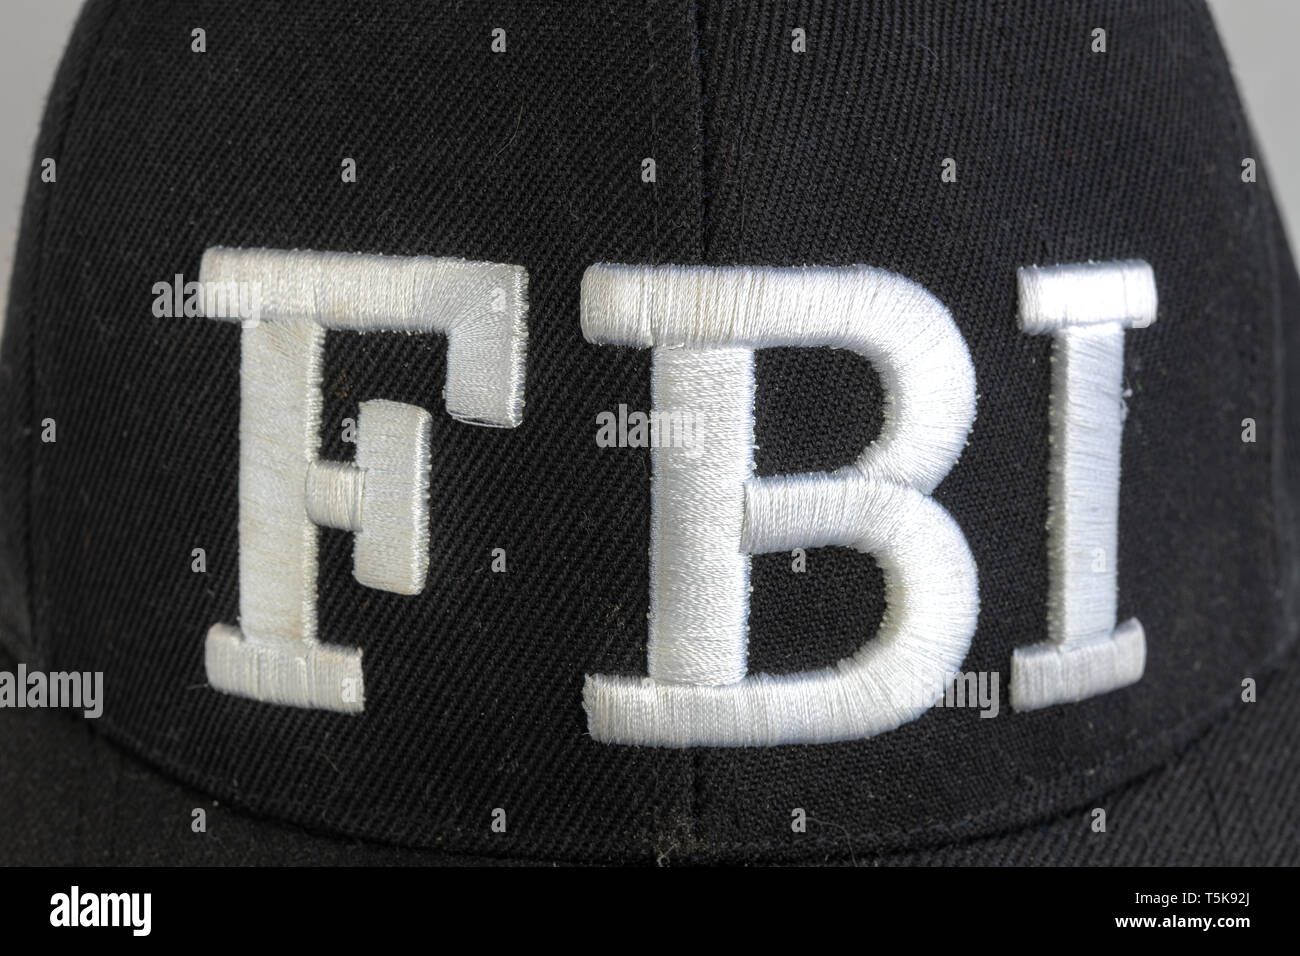 Close up of the FBI logo on a black cap. The text stands for Federal Bureau of Investigations. Frontal view. Stock Photo